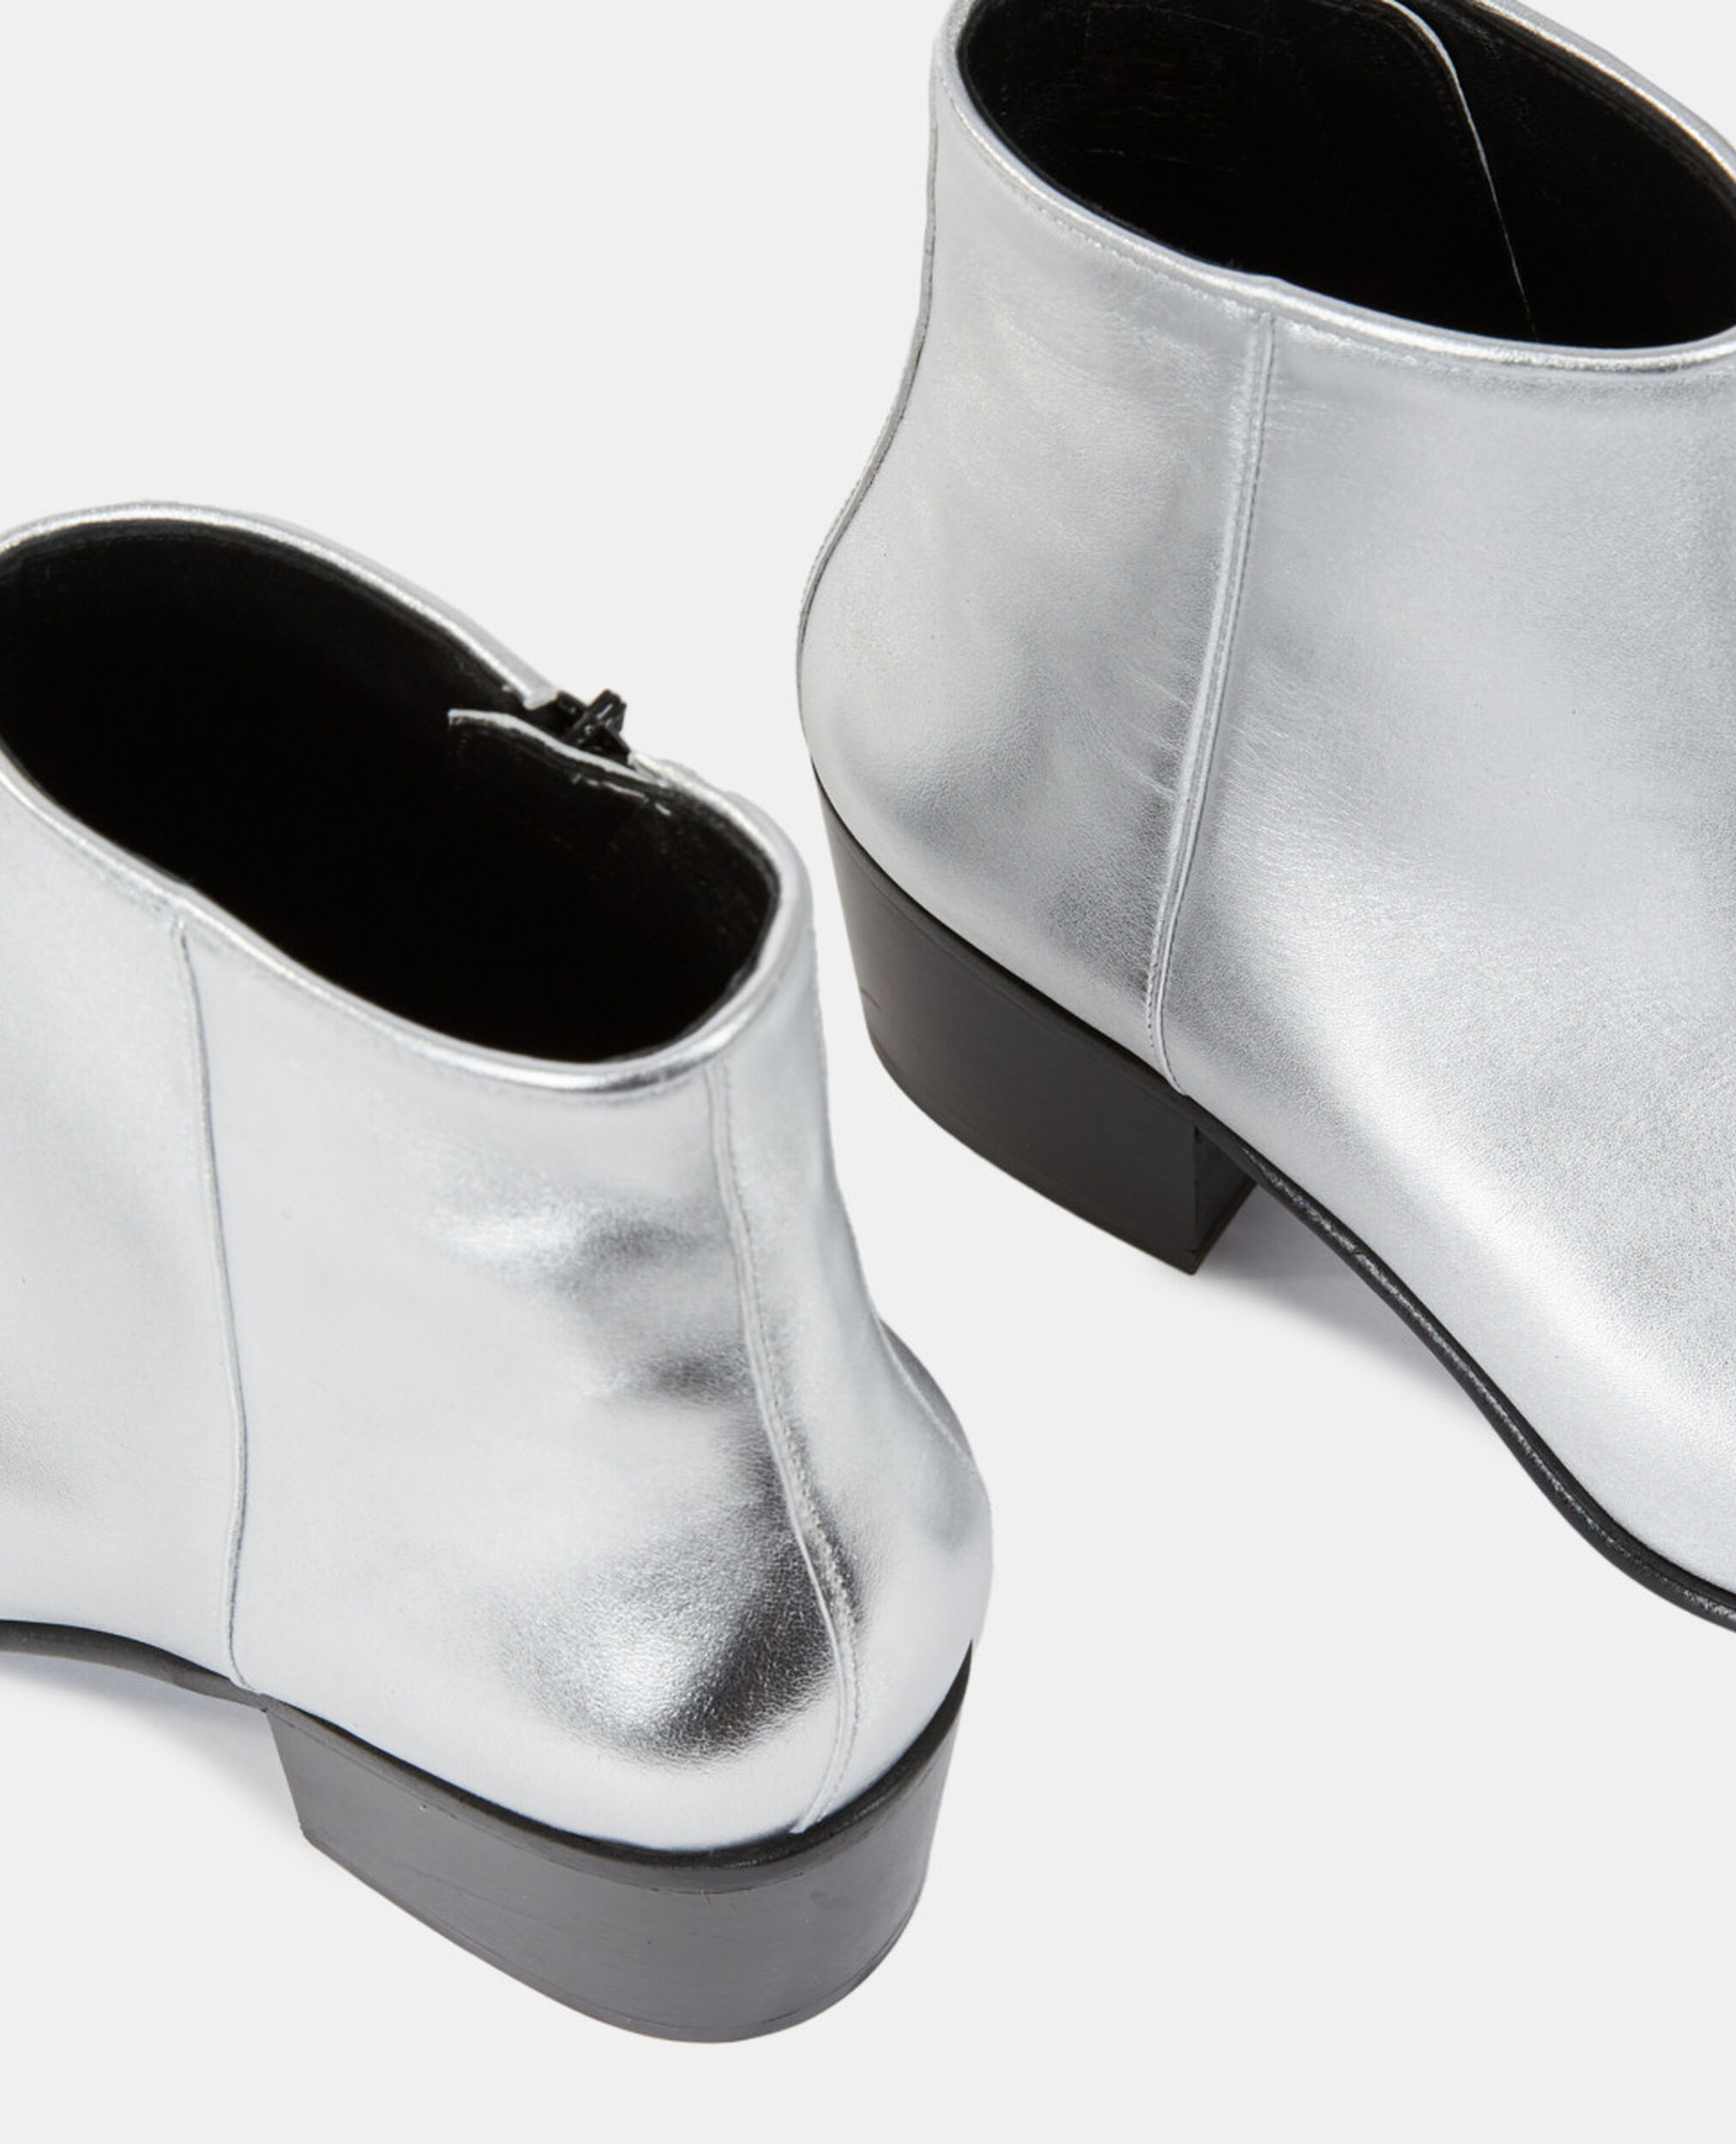 Silver leather boots, SILVER, hi-res image number null